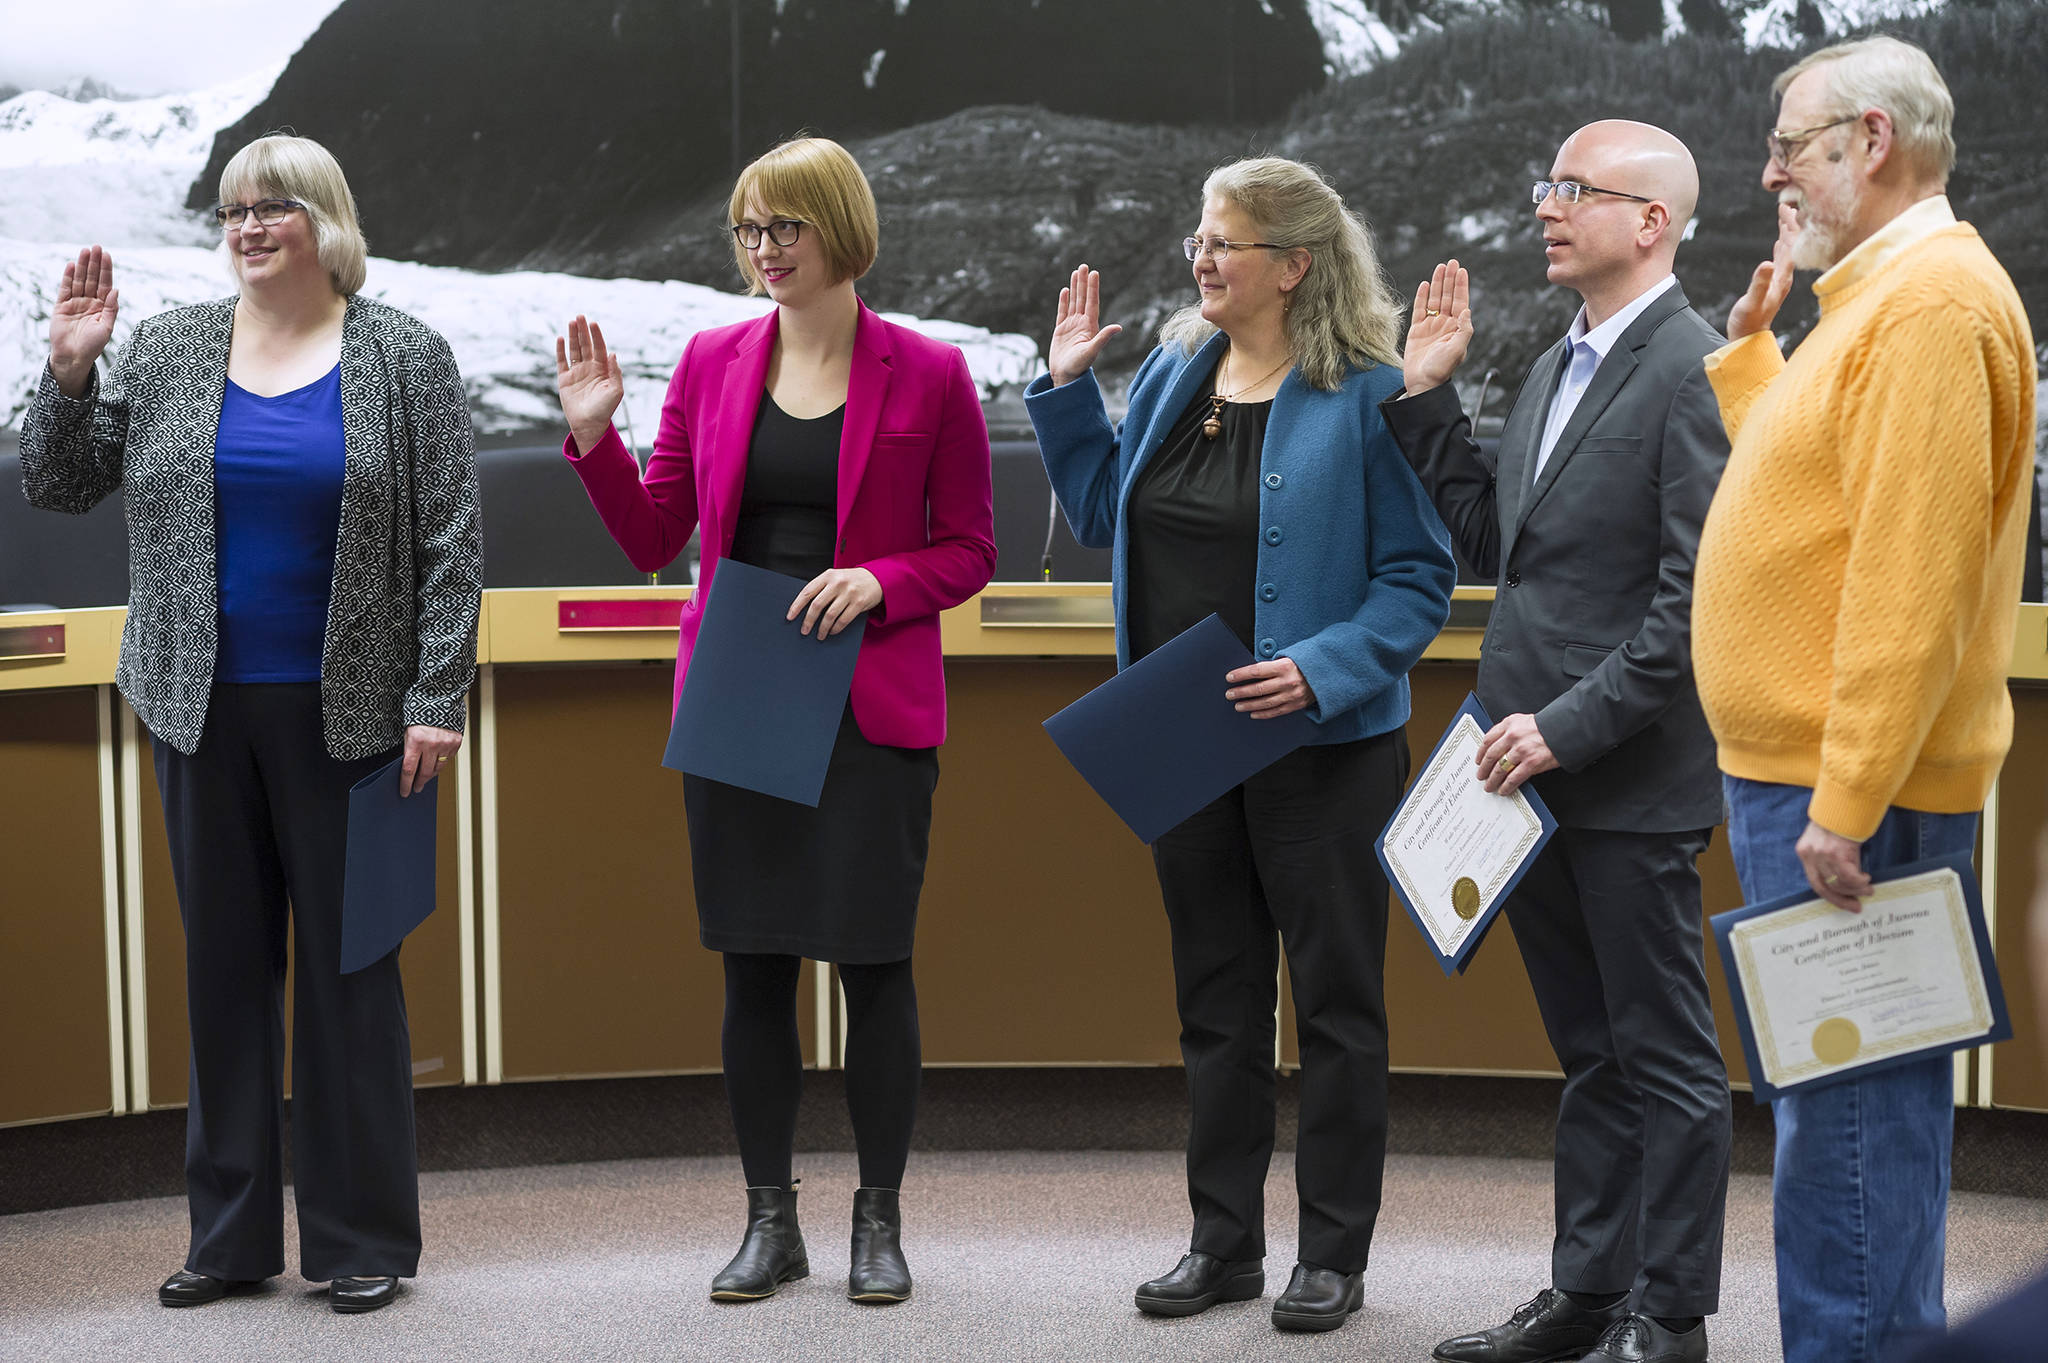 Mayor Beth Weldon, left, Carole Triem, Michelle Bonnet Hale, Wade Bryson and Loren Jones are sworn in to their new positions on the Juneau Assembly on Monday, Oct. 15, 2018. (Michael Penn | Juneau Empire File)